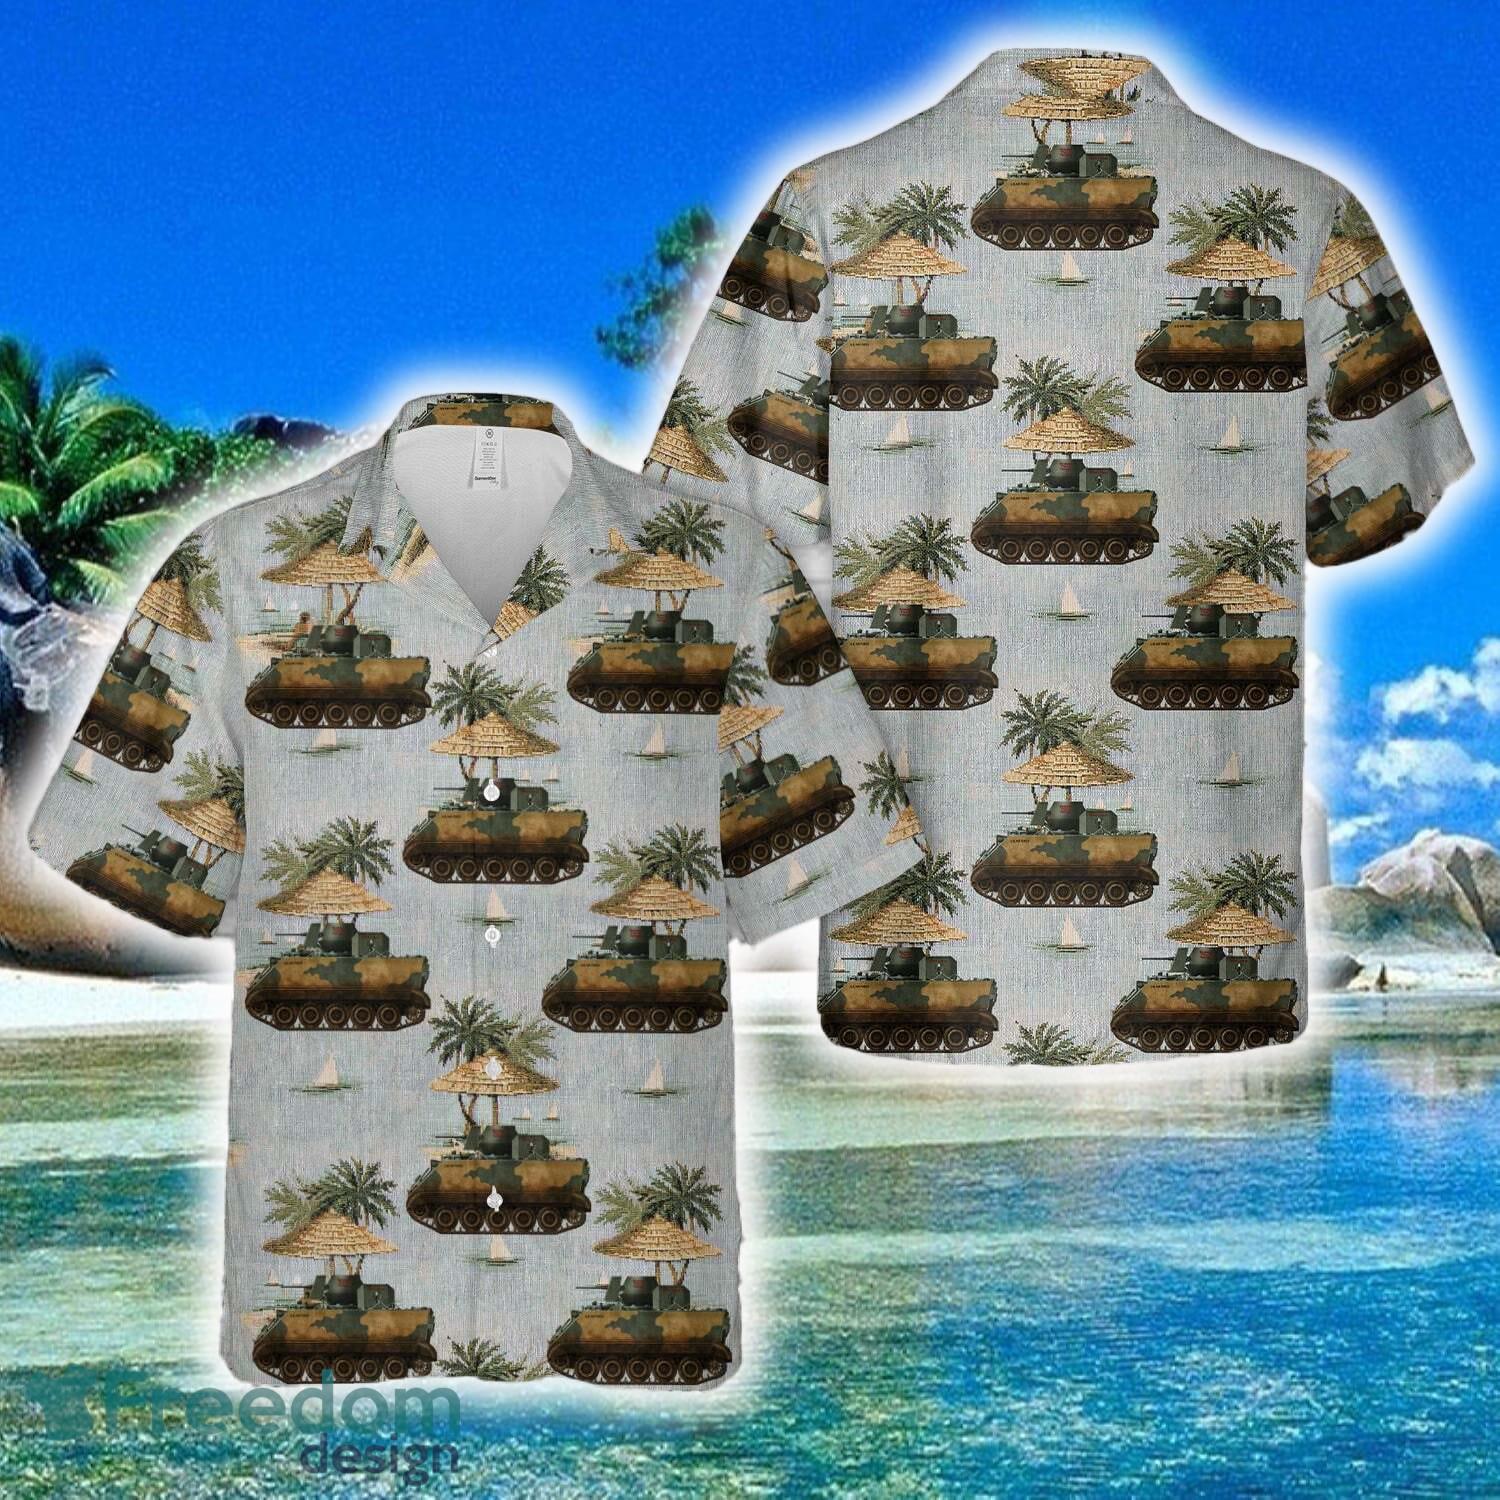 M113A1 ACAV of the US Air Force in Vietnam Hawaiian Shirt - M113A1 ACAV of the US Air Force in Vietnam Hawaiian Shirt